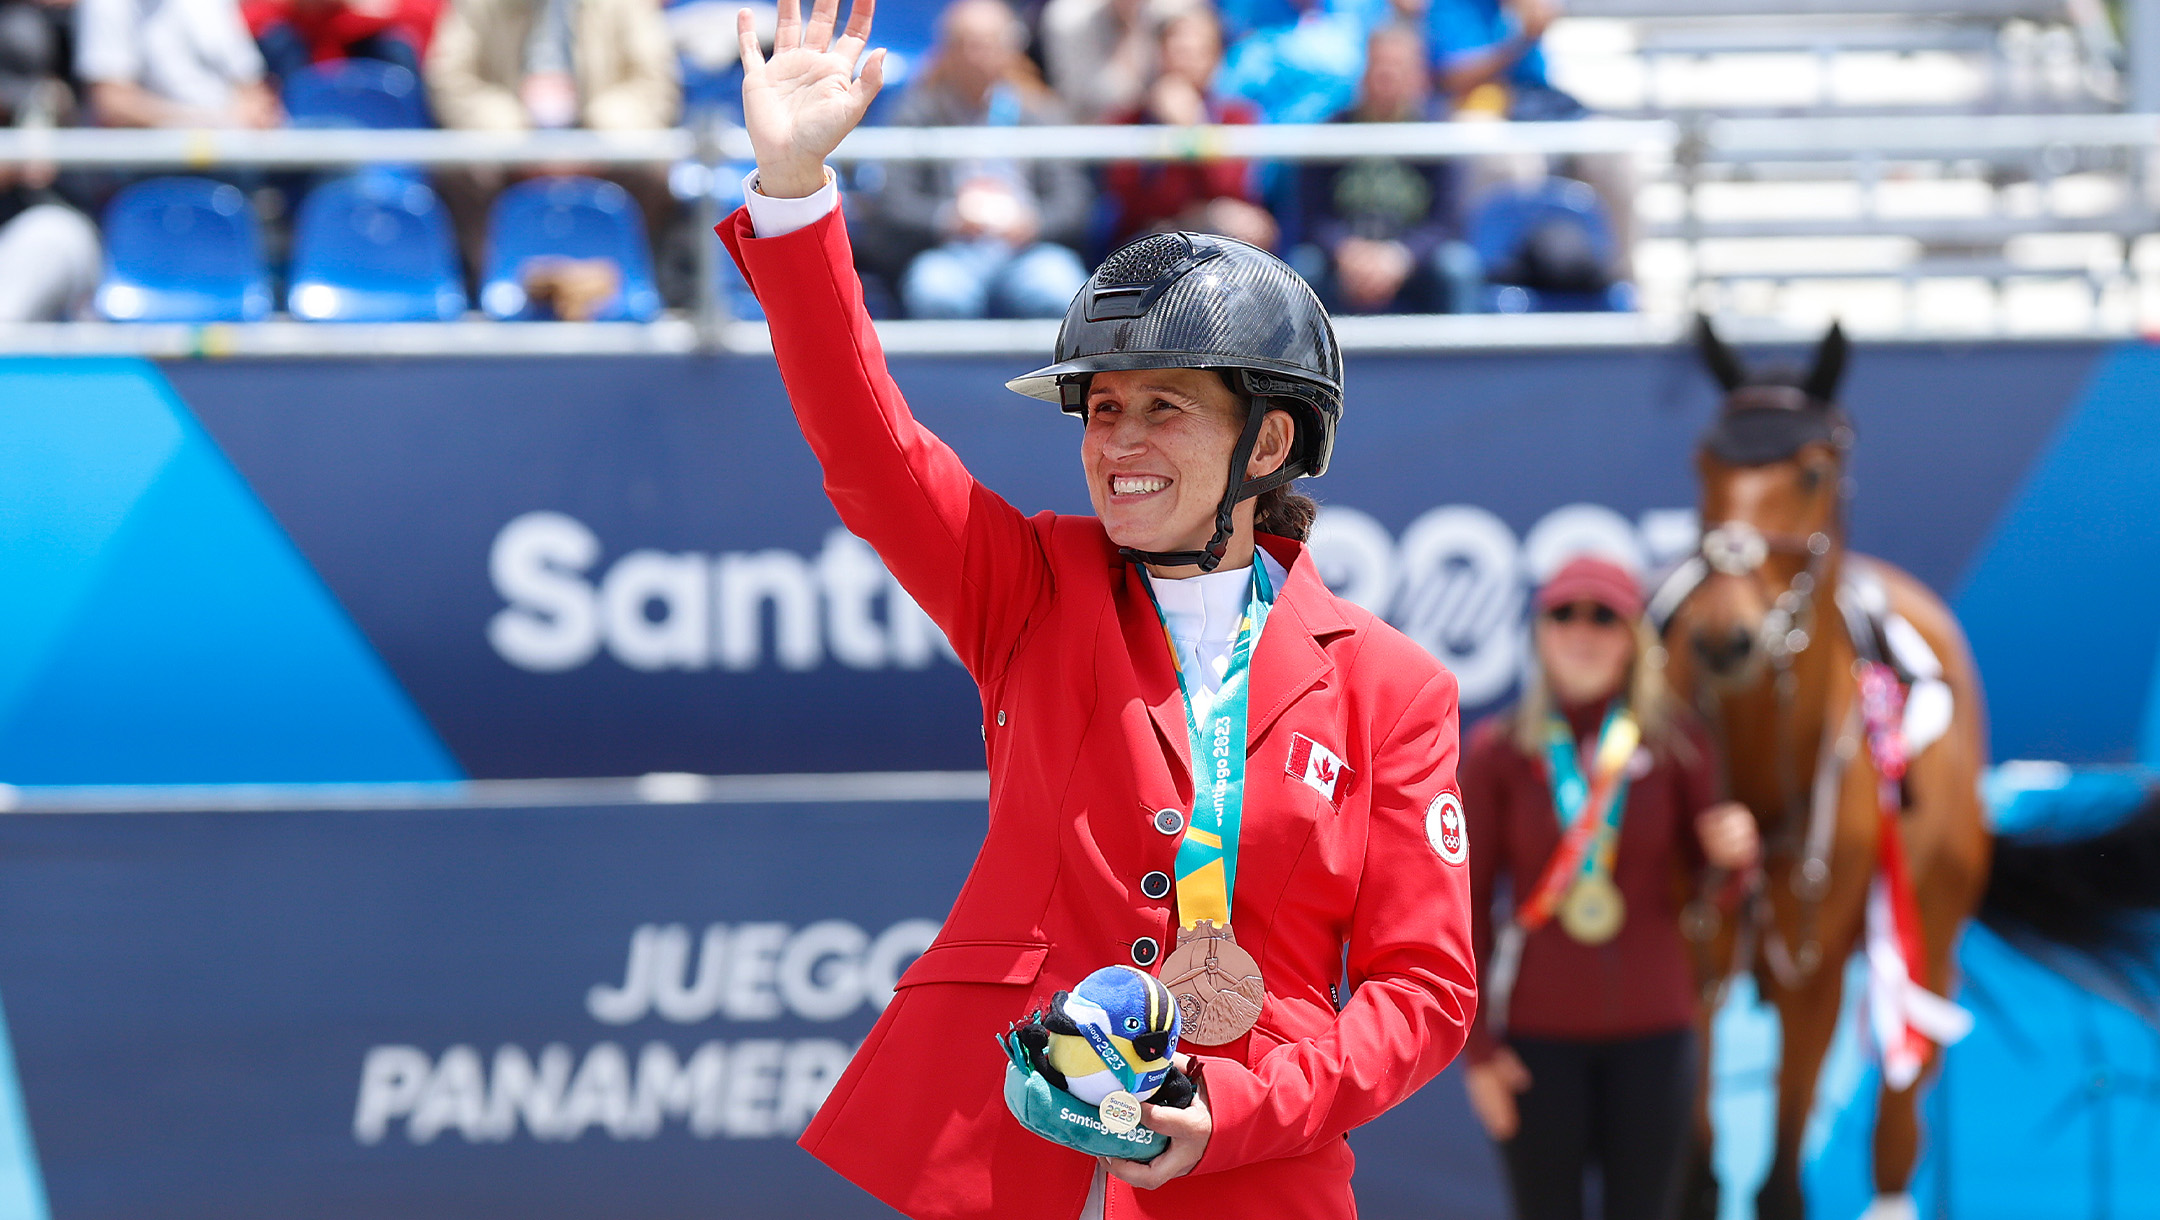 A woman wearing a black helmet and Team Canada jacket has a gold medal around her neck and waves to a crowd.